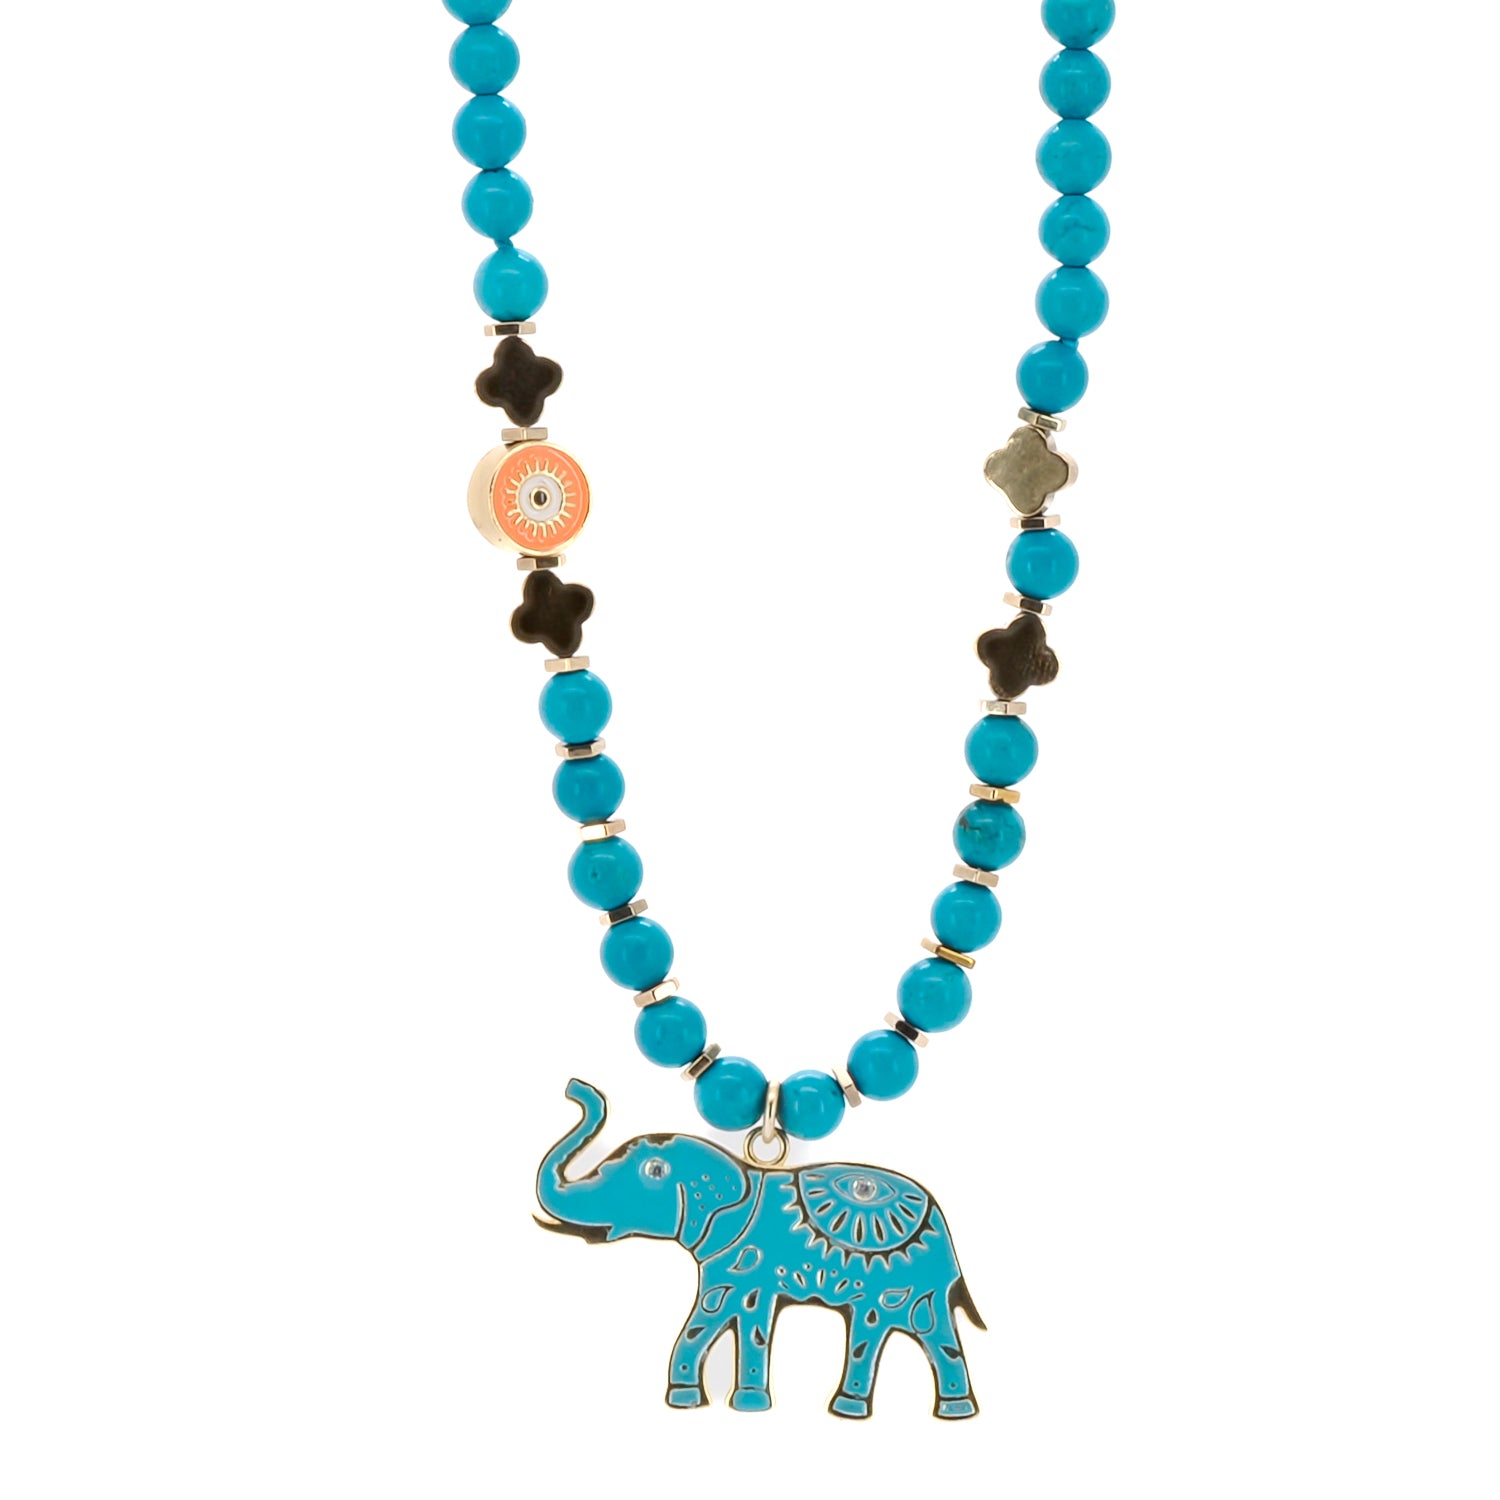 A close-up of the Turquoise Blue Elephant Necklace, showcasing its vibrant turquoise stone beads